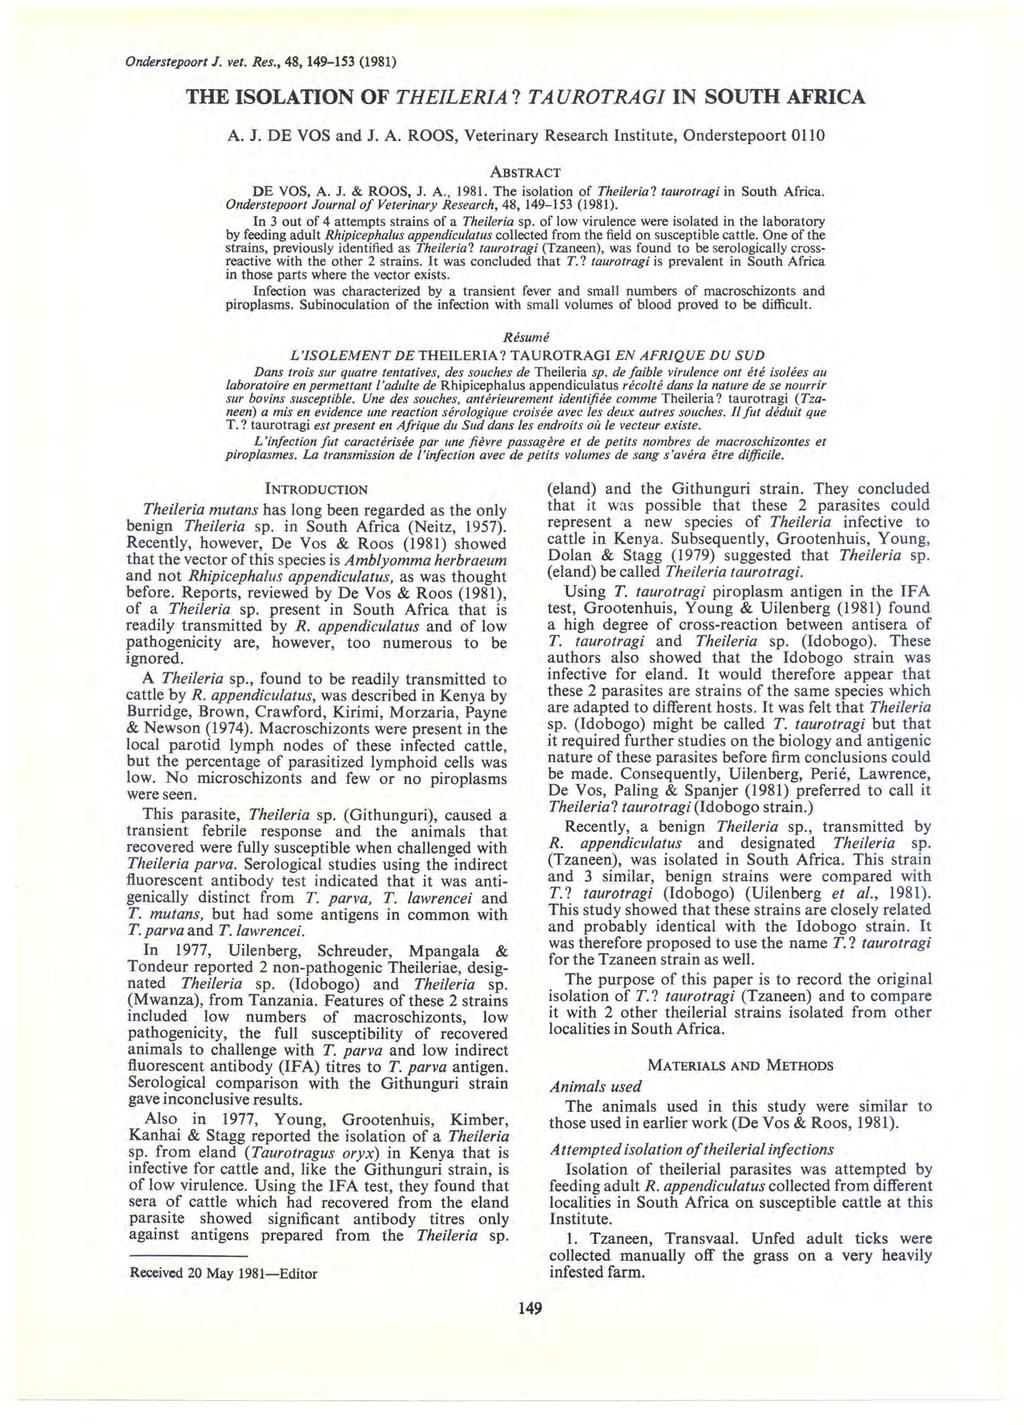 Onderstepoort J. vet. Res., 48, 149153 (1981) A. J. DEVOS and J. A. ROOS, Veterinary Research Institute, Onderstepoort 11 ABSTRACT DE VOS, A. J. & ROOS, J. A., 1981. The isolation of Theileria?